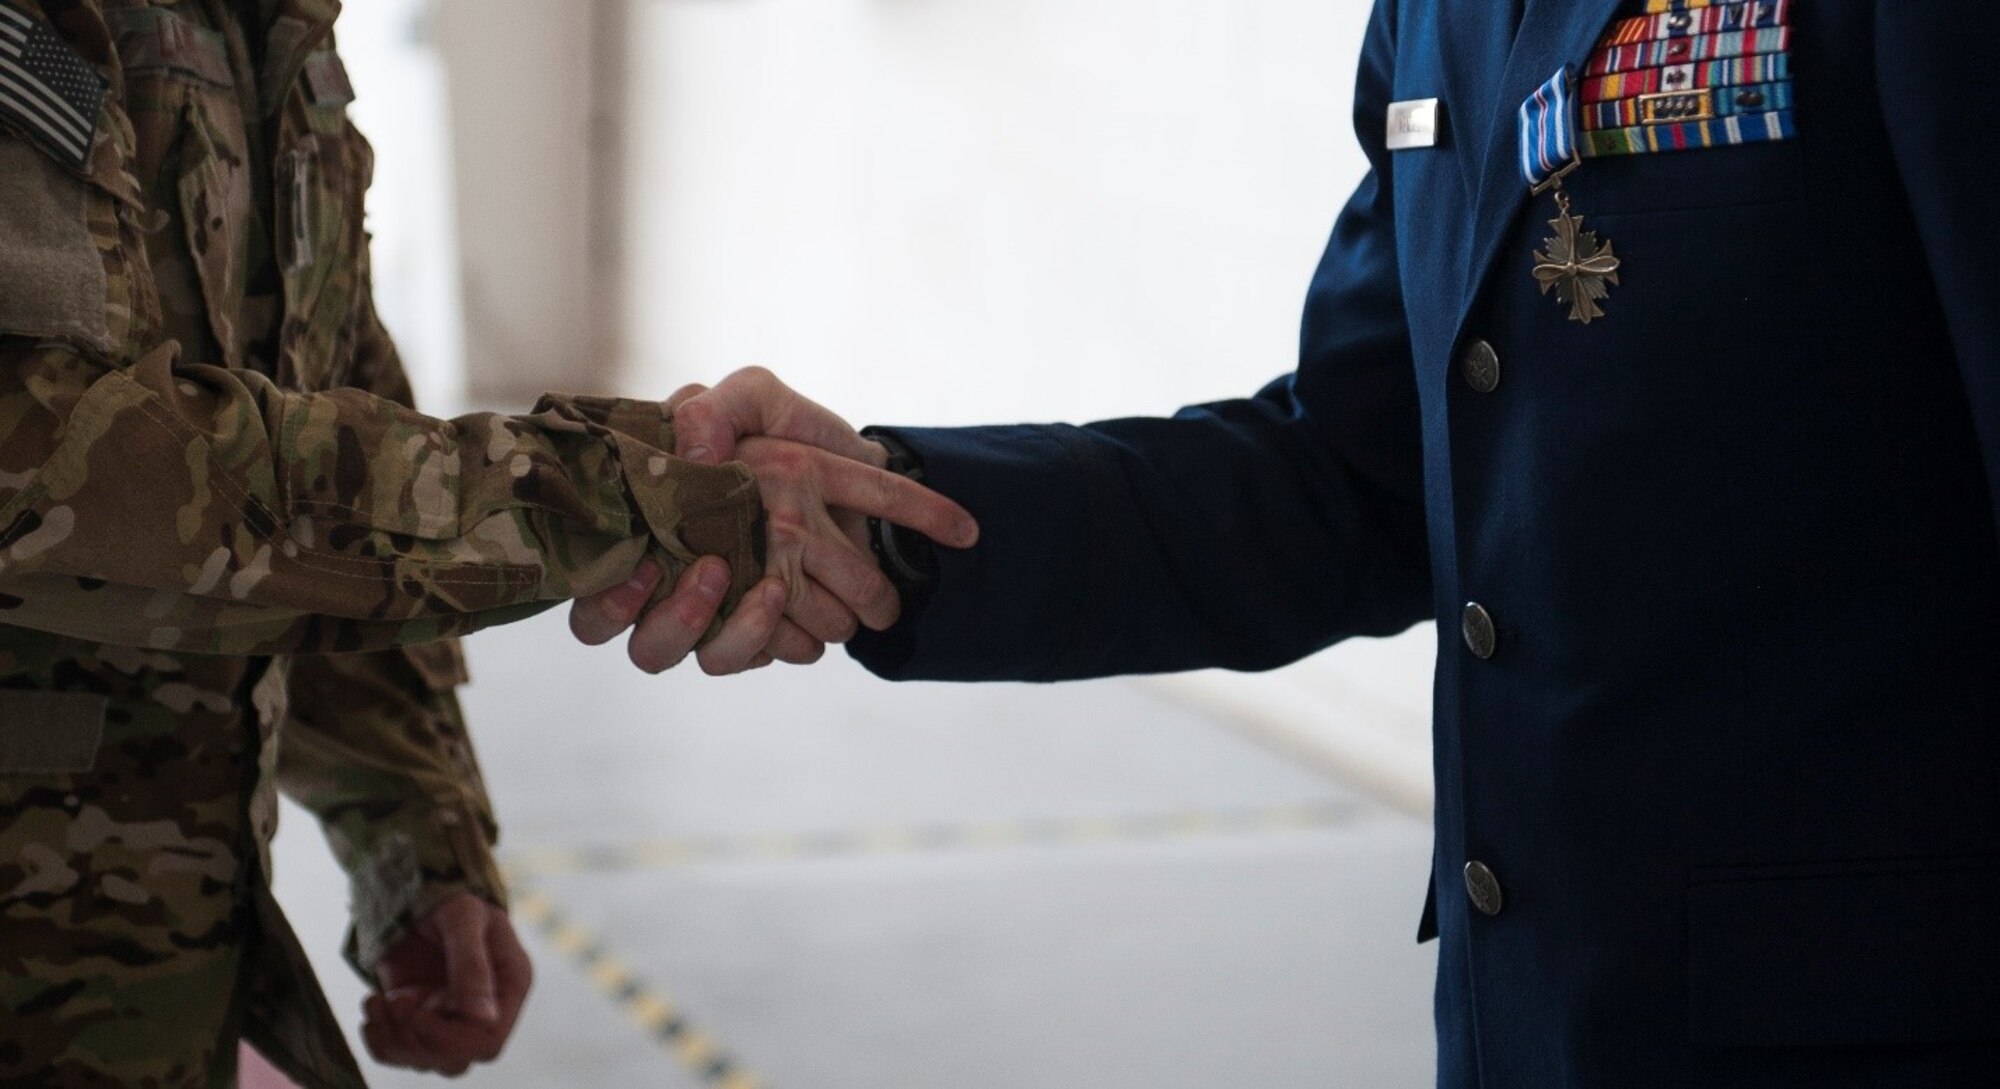 Maj. William Mendel, 20th Special Operations Squadron, shakes hands with another Airman after receiving the Distinguished Flying Cross, for his heroics during a mission in Africa, at Cannon Air Force Base, N.M., May 15, 2017. Mendel flew the CV-22 Osprey during the mission, and safely recovered his aircraft, crew and passengers despite severe damage received from heavy gunfire. (U.S. Air Force photo by Senior Airman Lane T. Plummer)